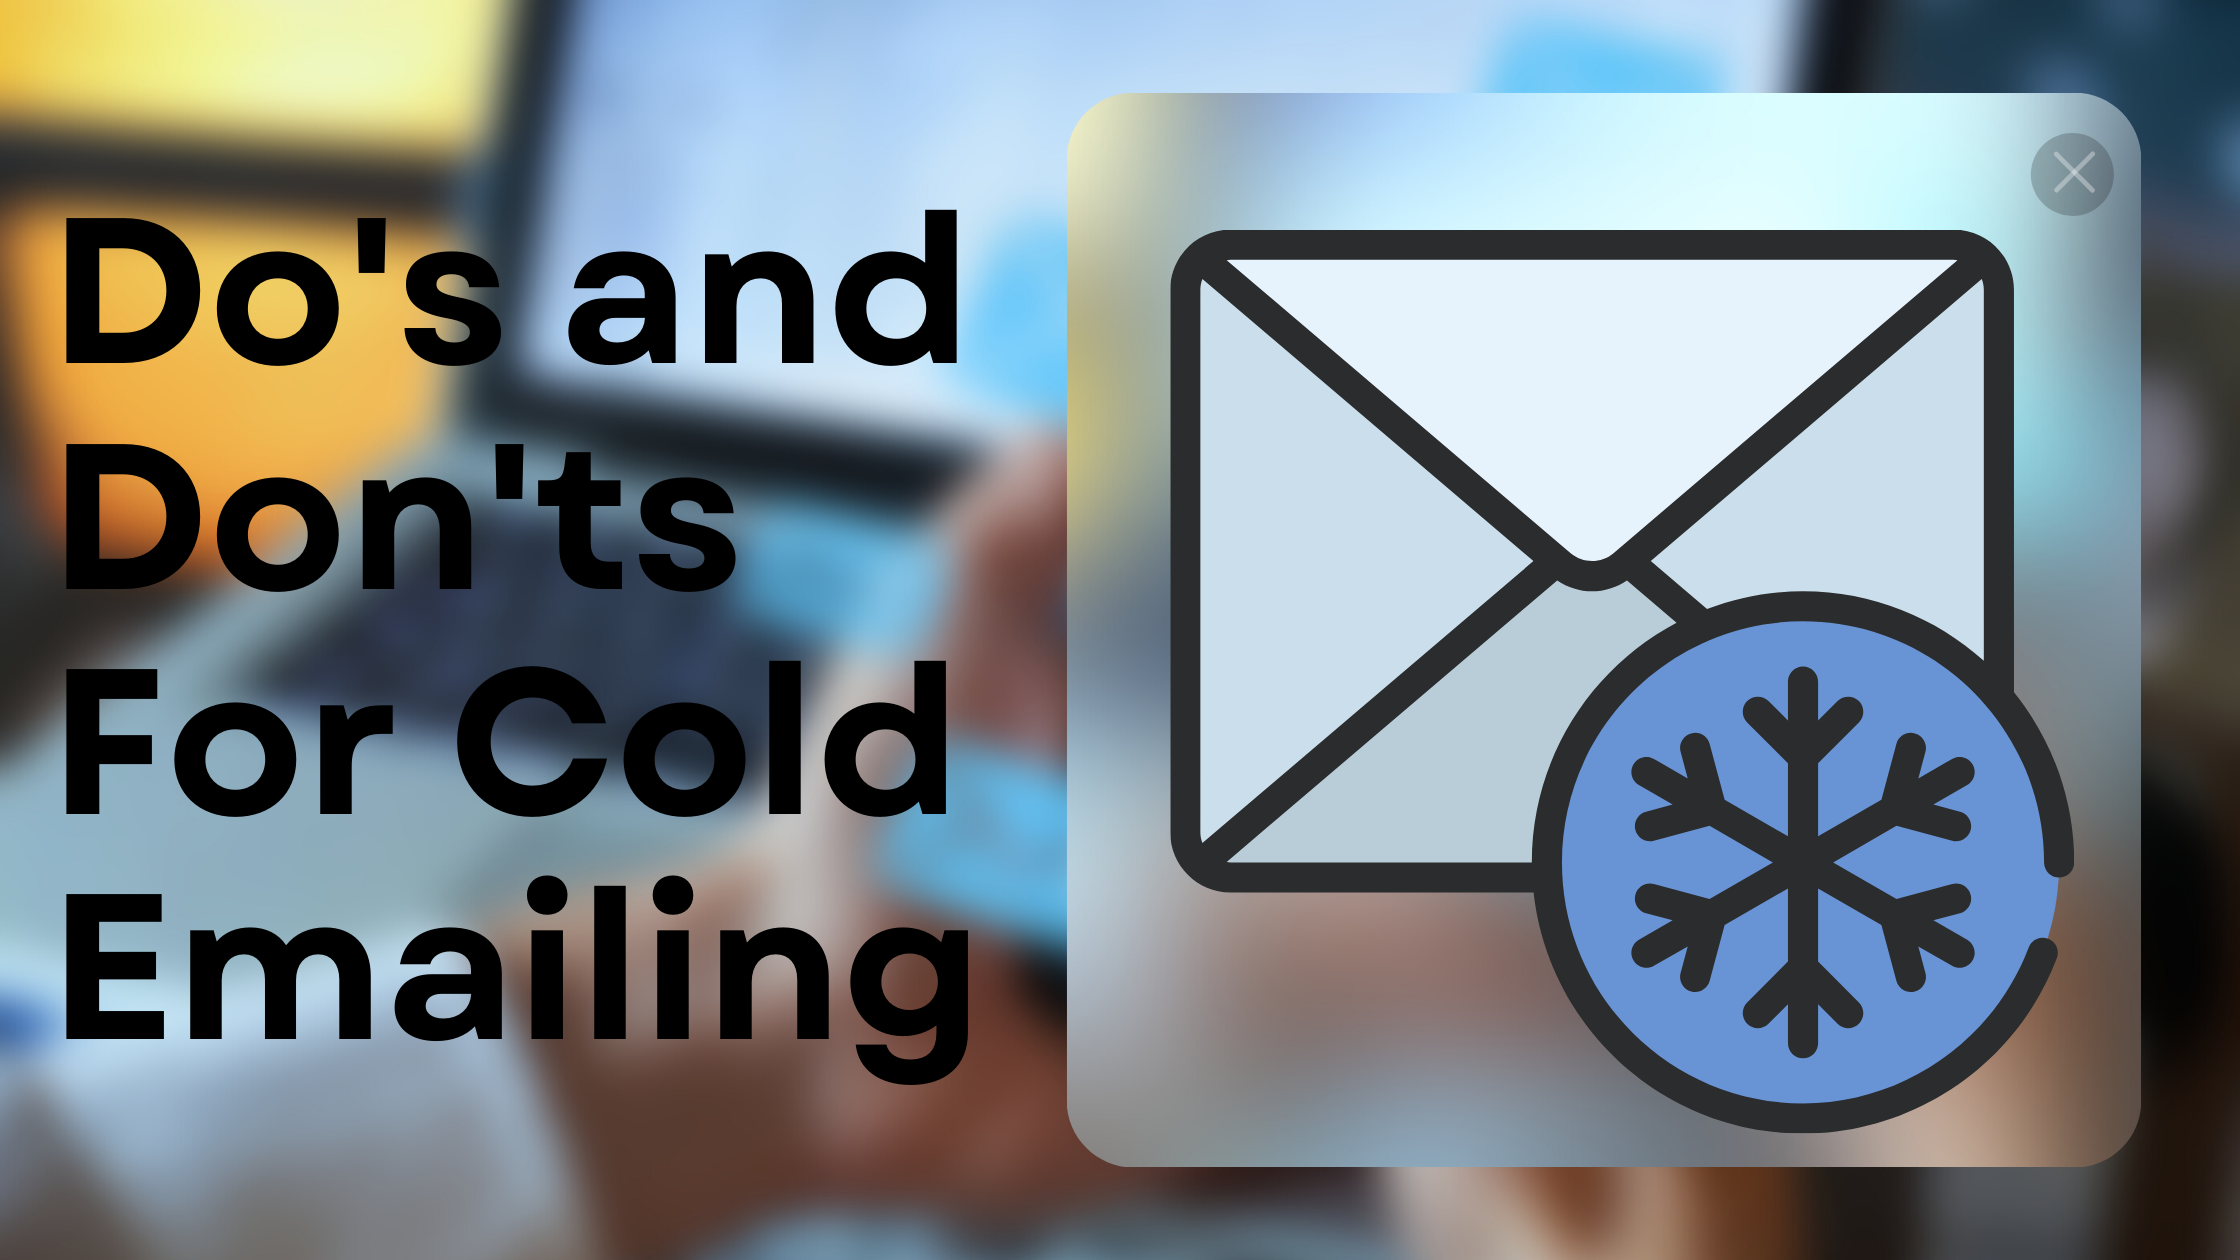 Do's and Don'ts for cold emailing